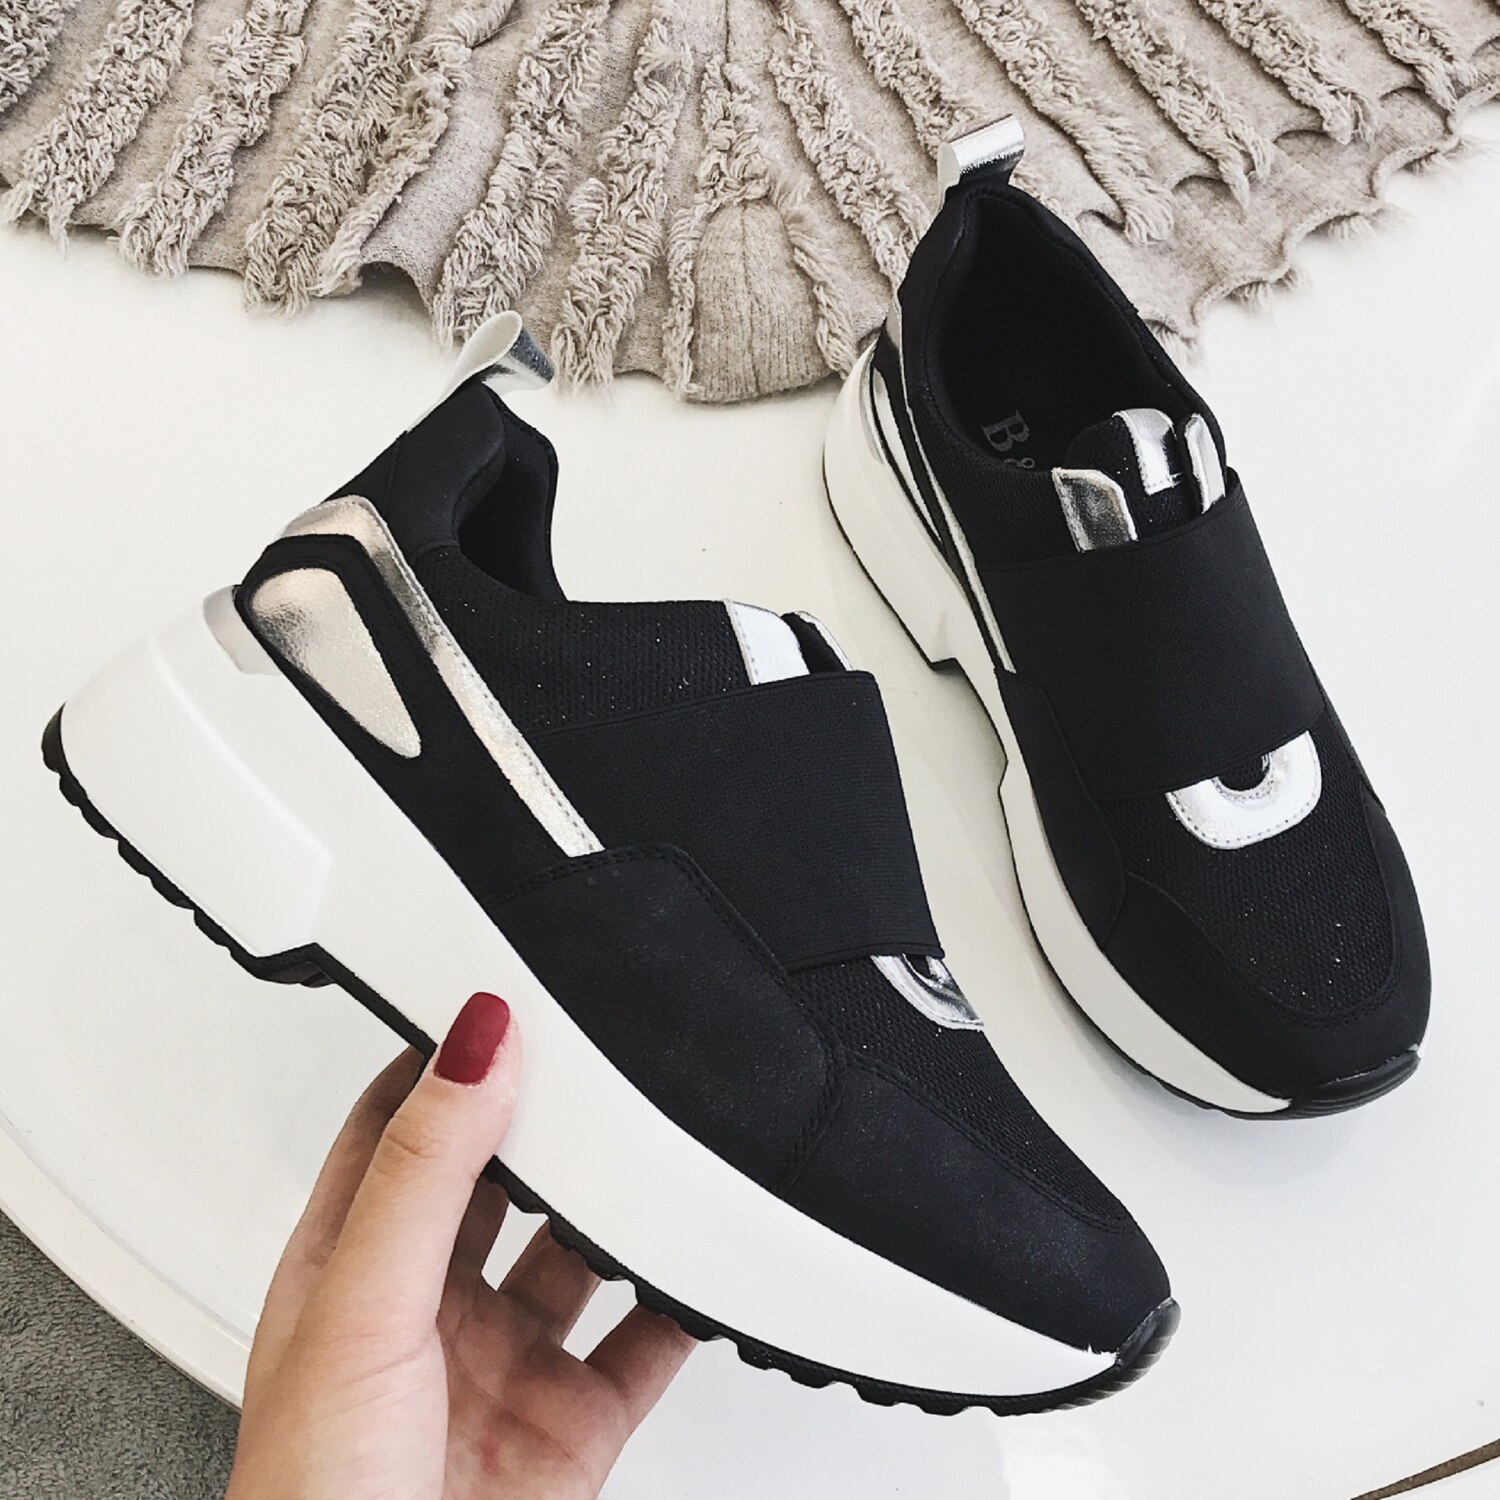 2021 New Sneakers Women Shoes Flats Platform Luxury Chunky Fashion Casual Slip On Easy To Run Or Walk shoes